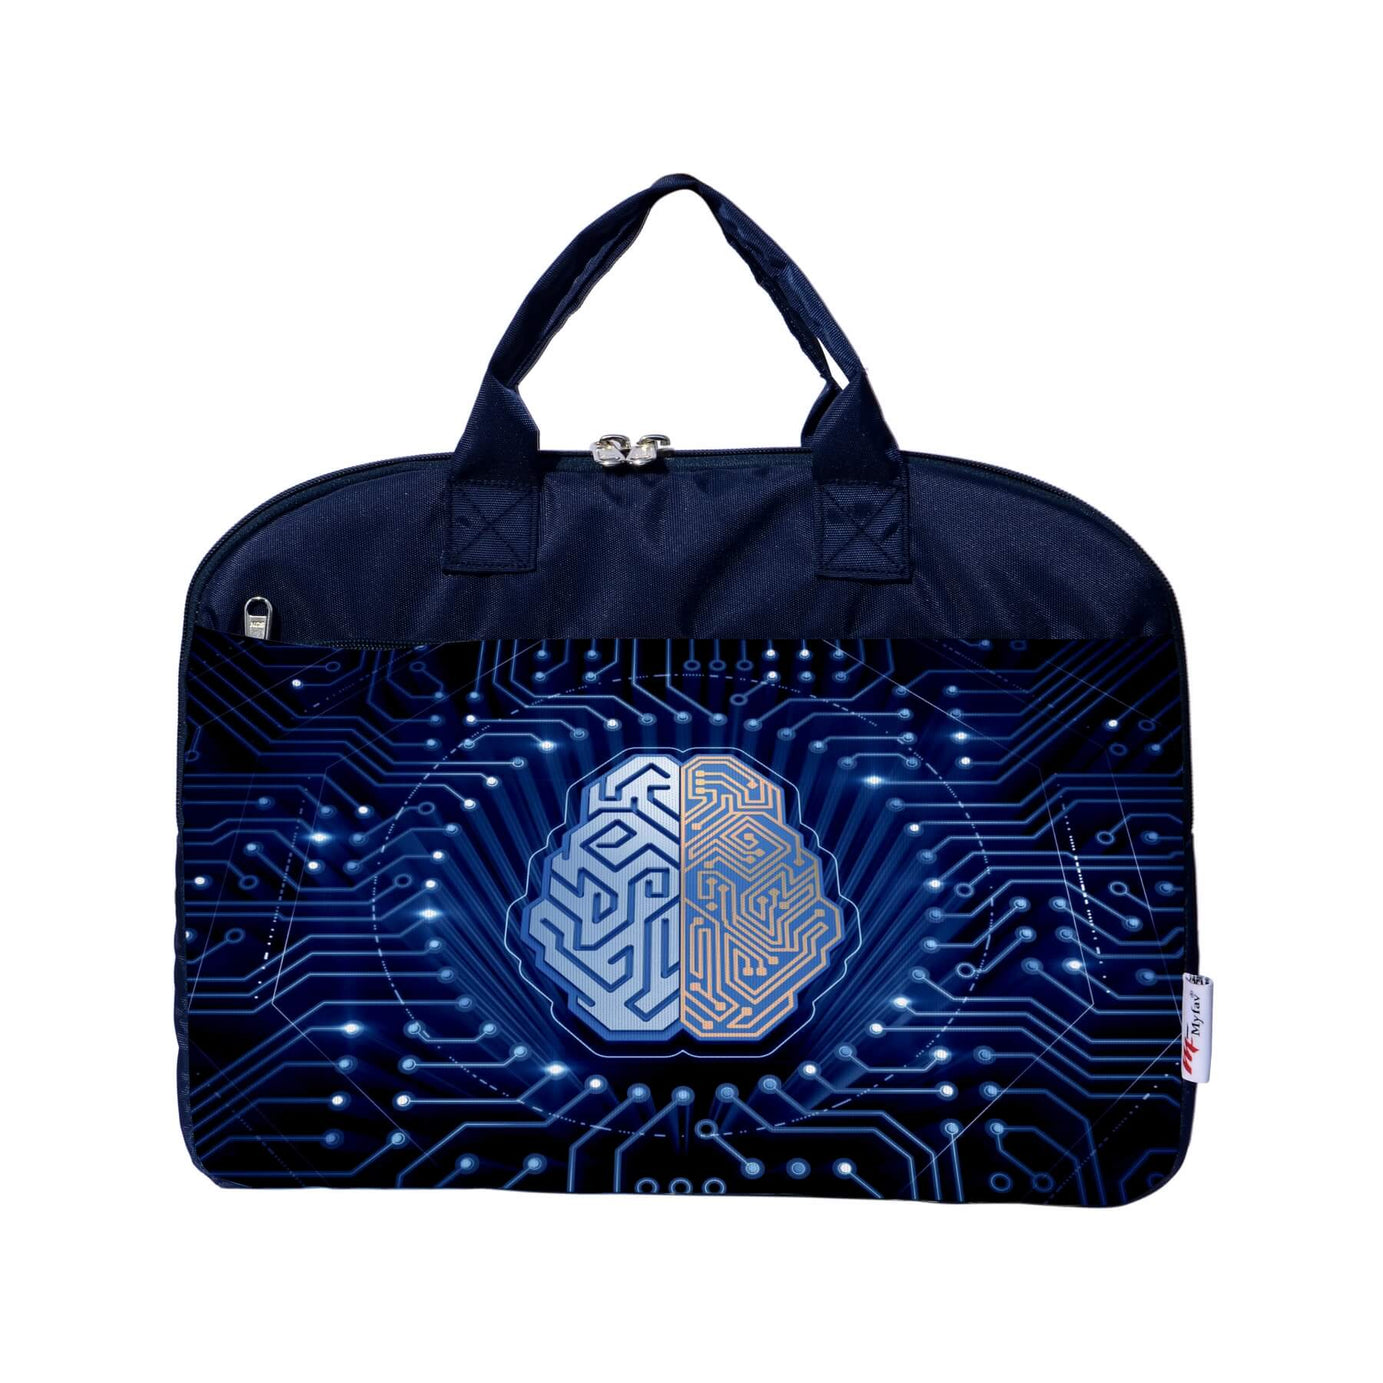 My Fav Digital Print Office Laptop Bag Briefcase 15.6 Inch for Women and Men